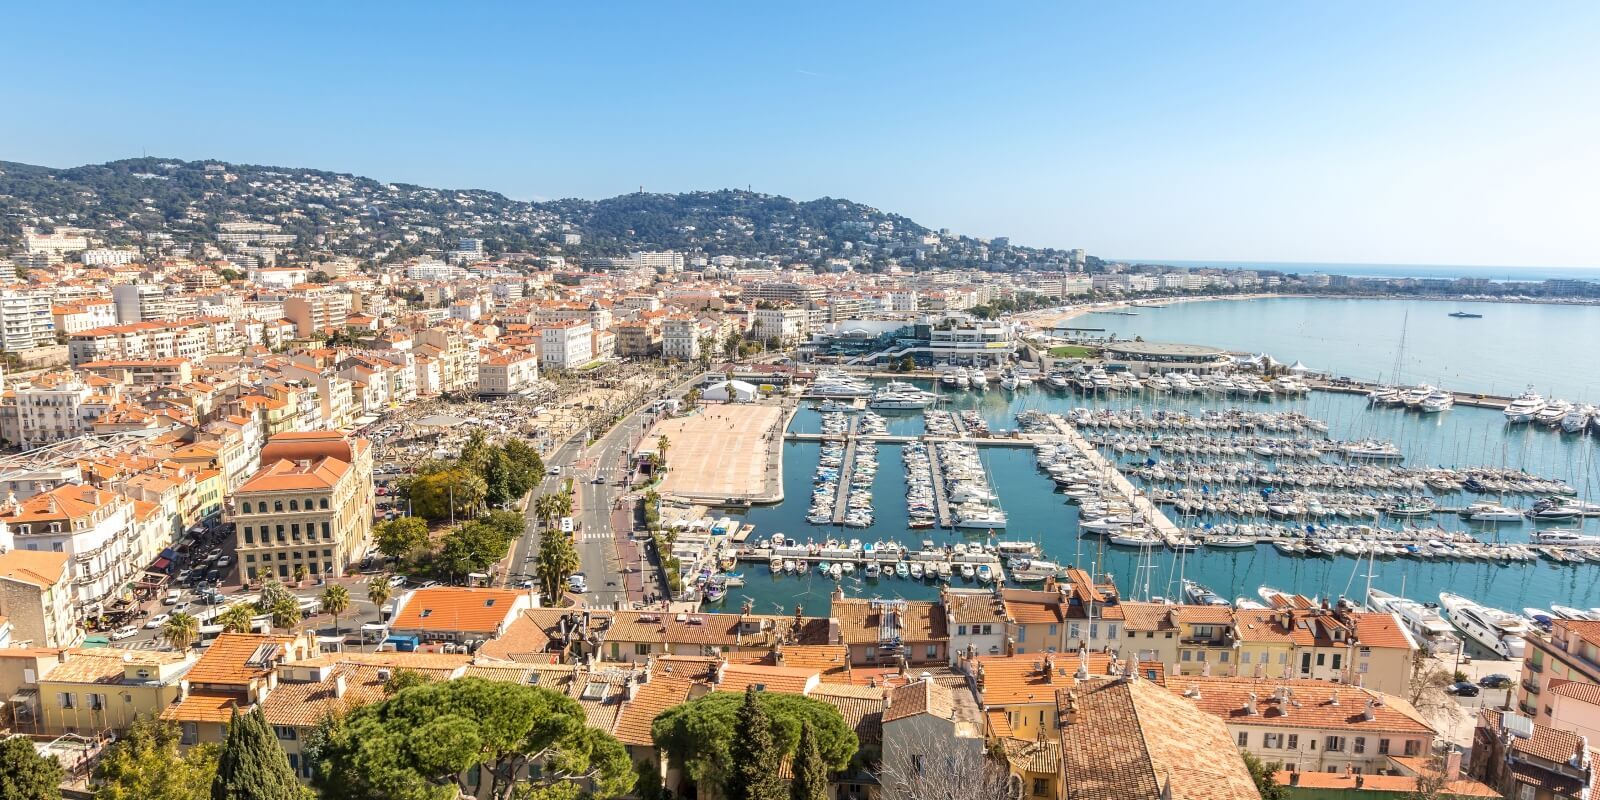 https://www.talamare.com/medias/View of Cannes old port with charter yachts during a trade show congress MIPIM, Cannes Lions, MIPCOM and Film Festival